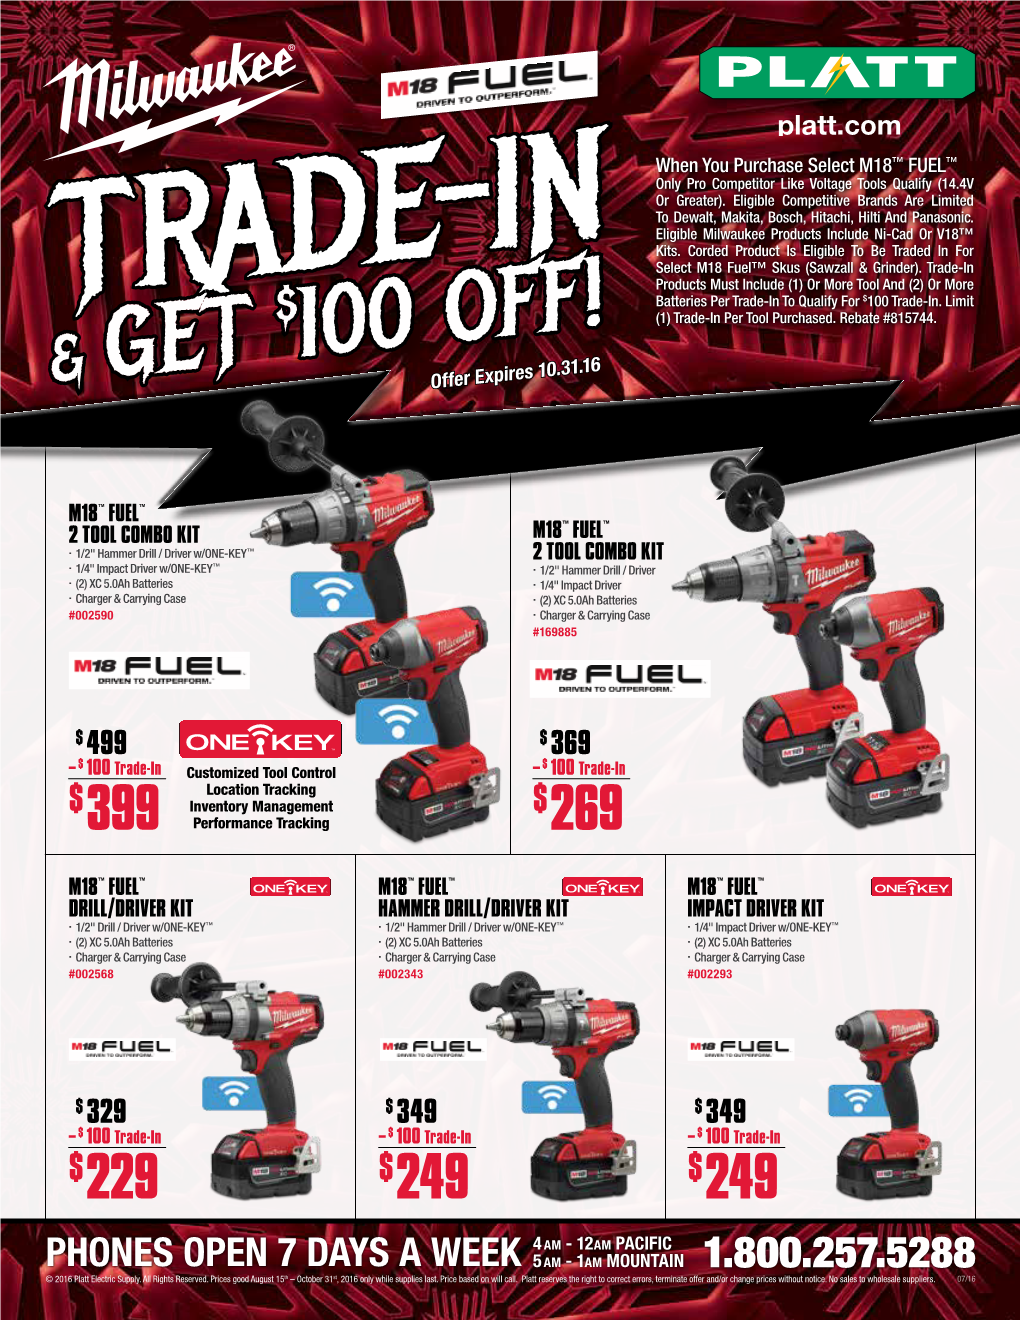 100 OFF! (1) Trade-In Per Tool Purchased